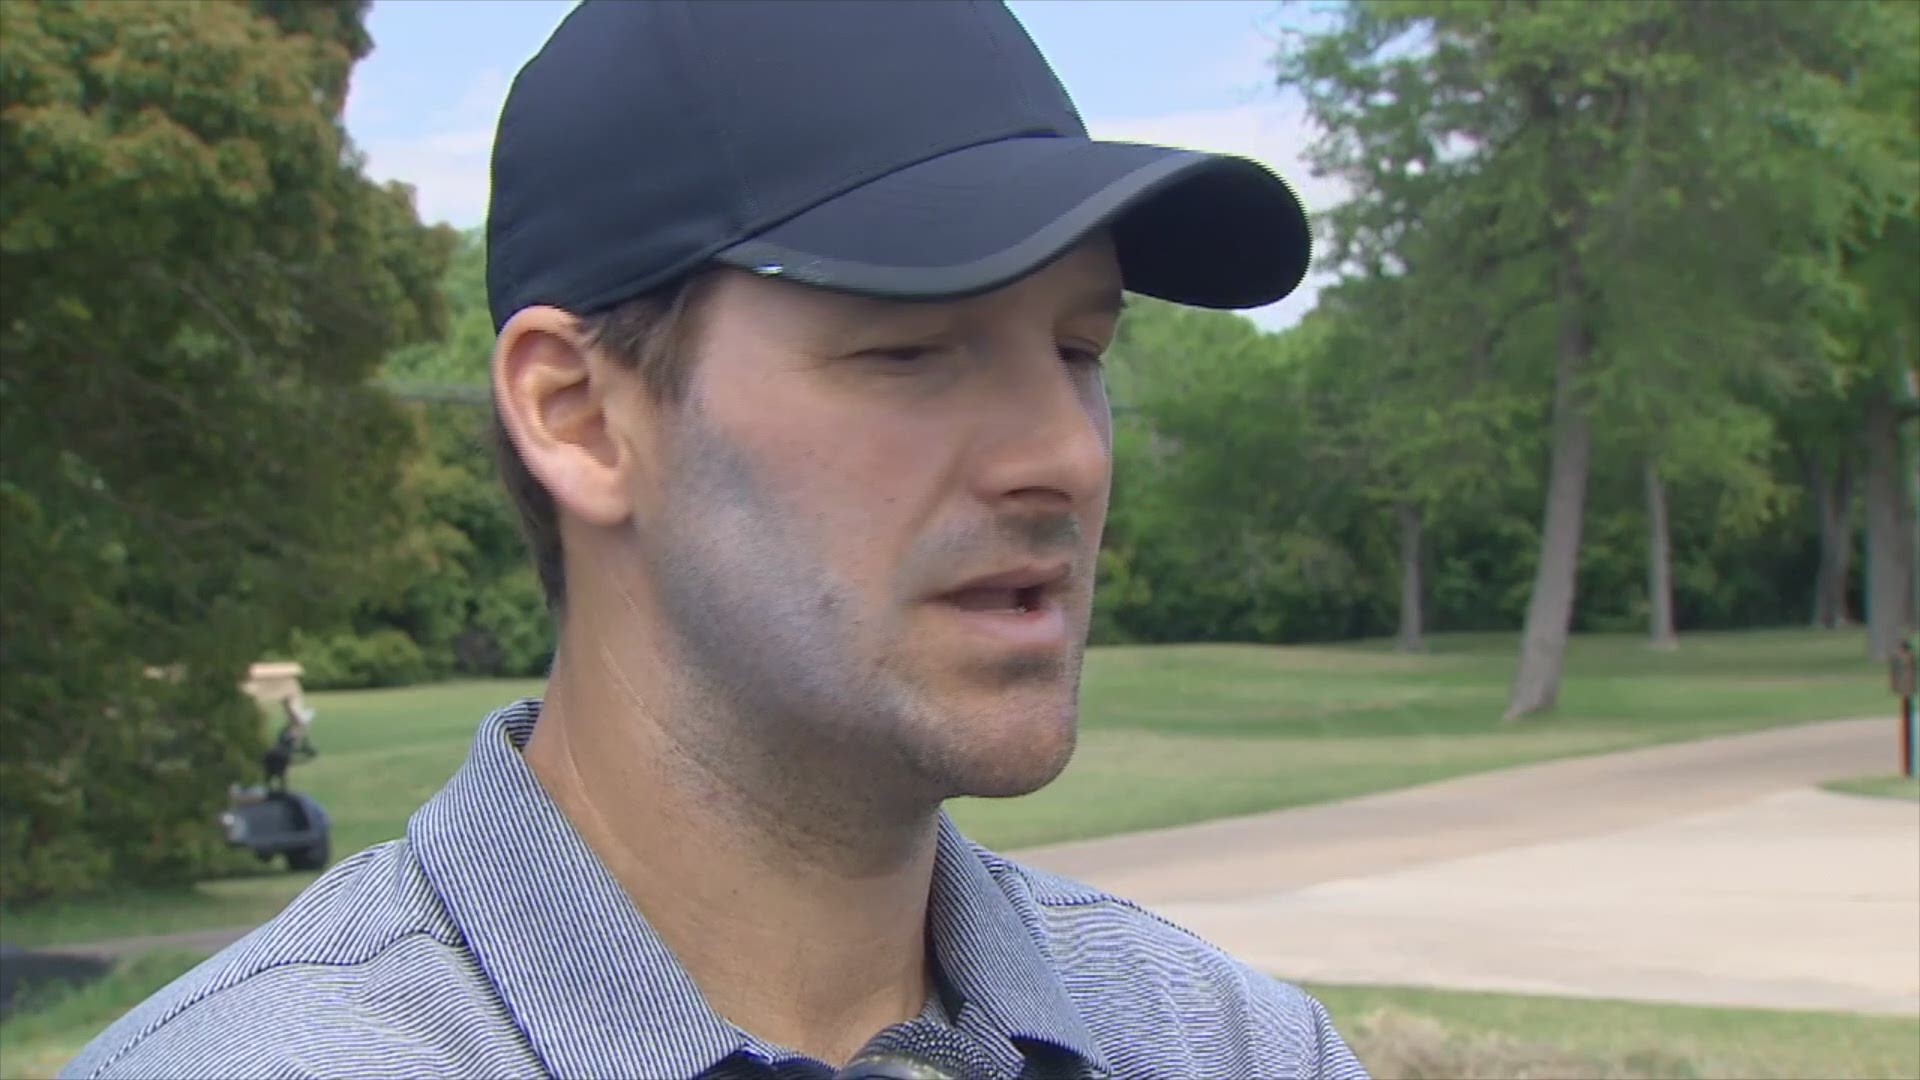 Tony Romo weighs in on Jason Witten's career and potential retirement from football. WFAA.com